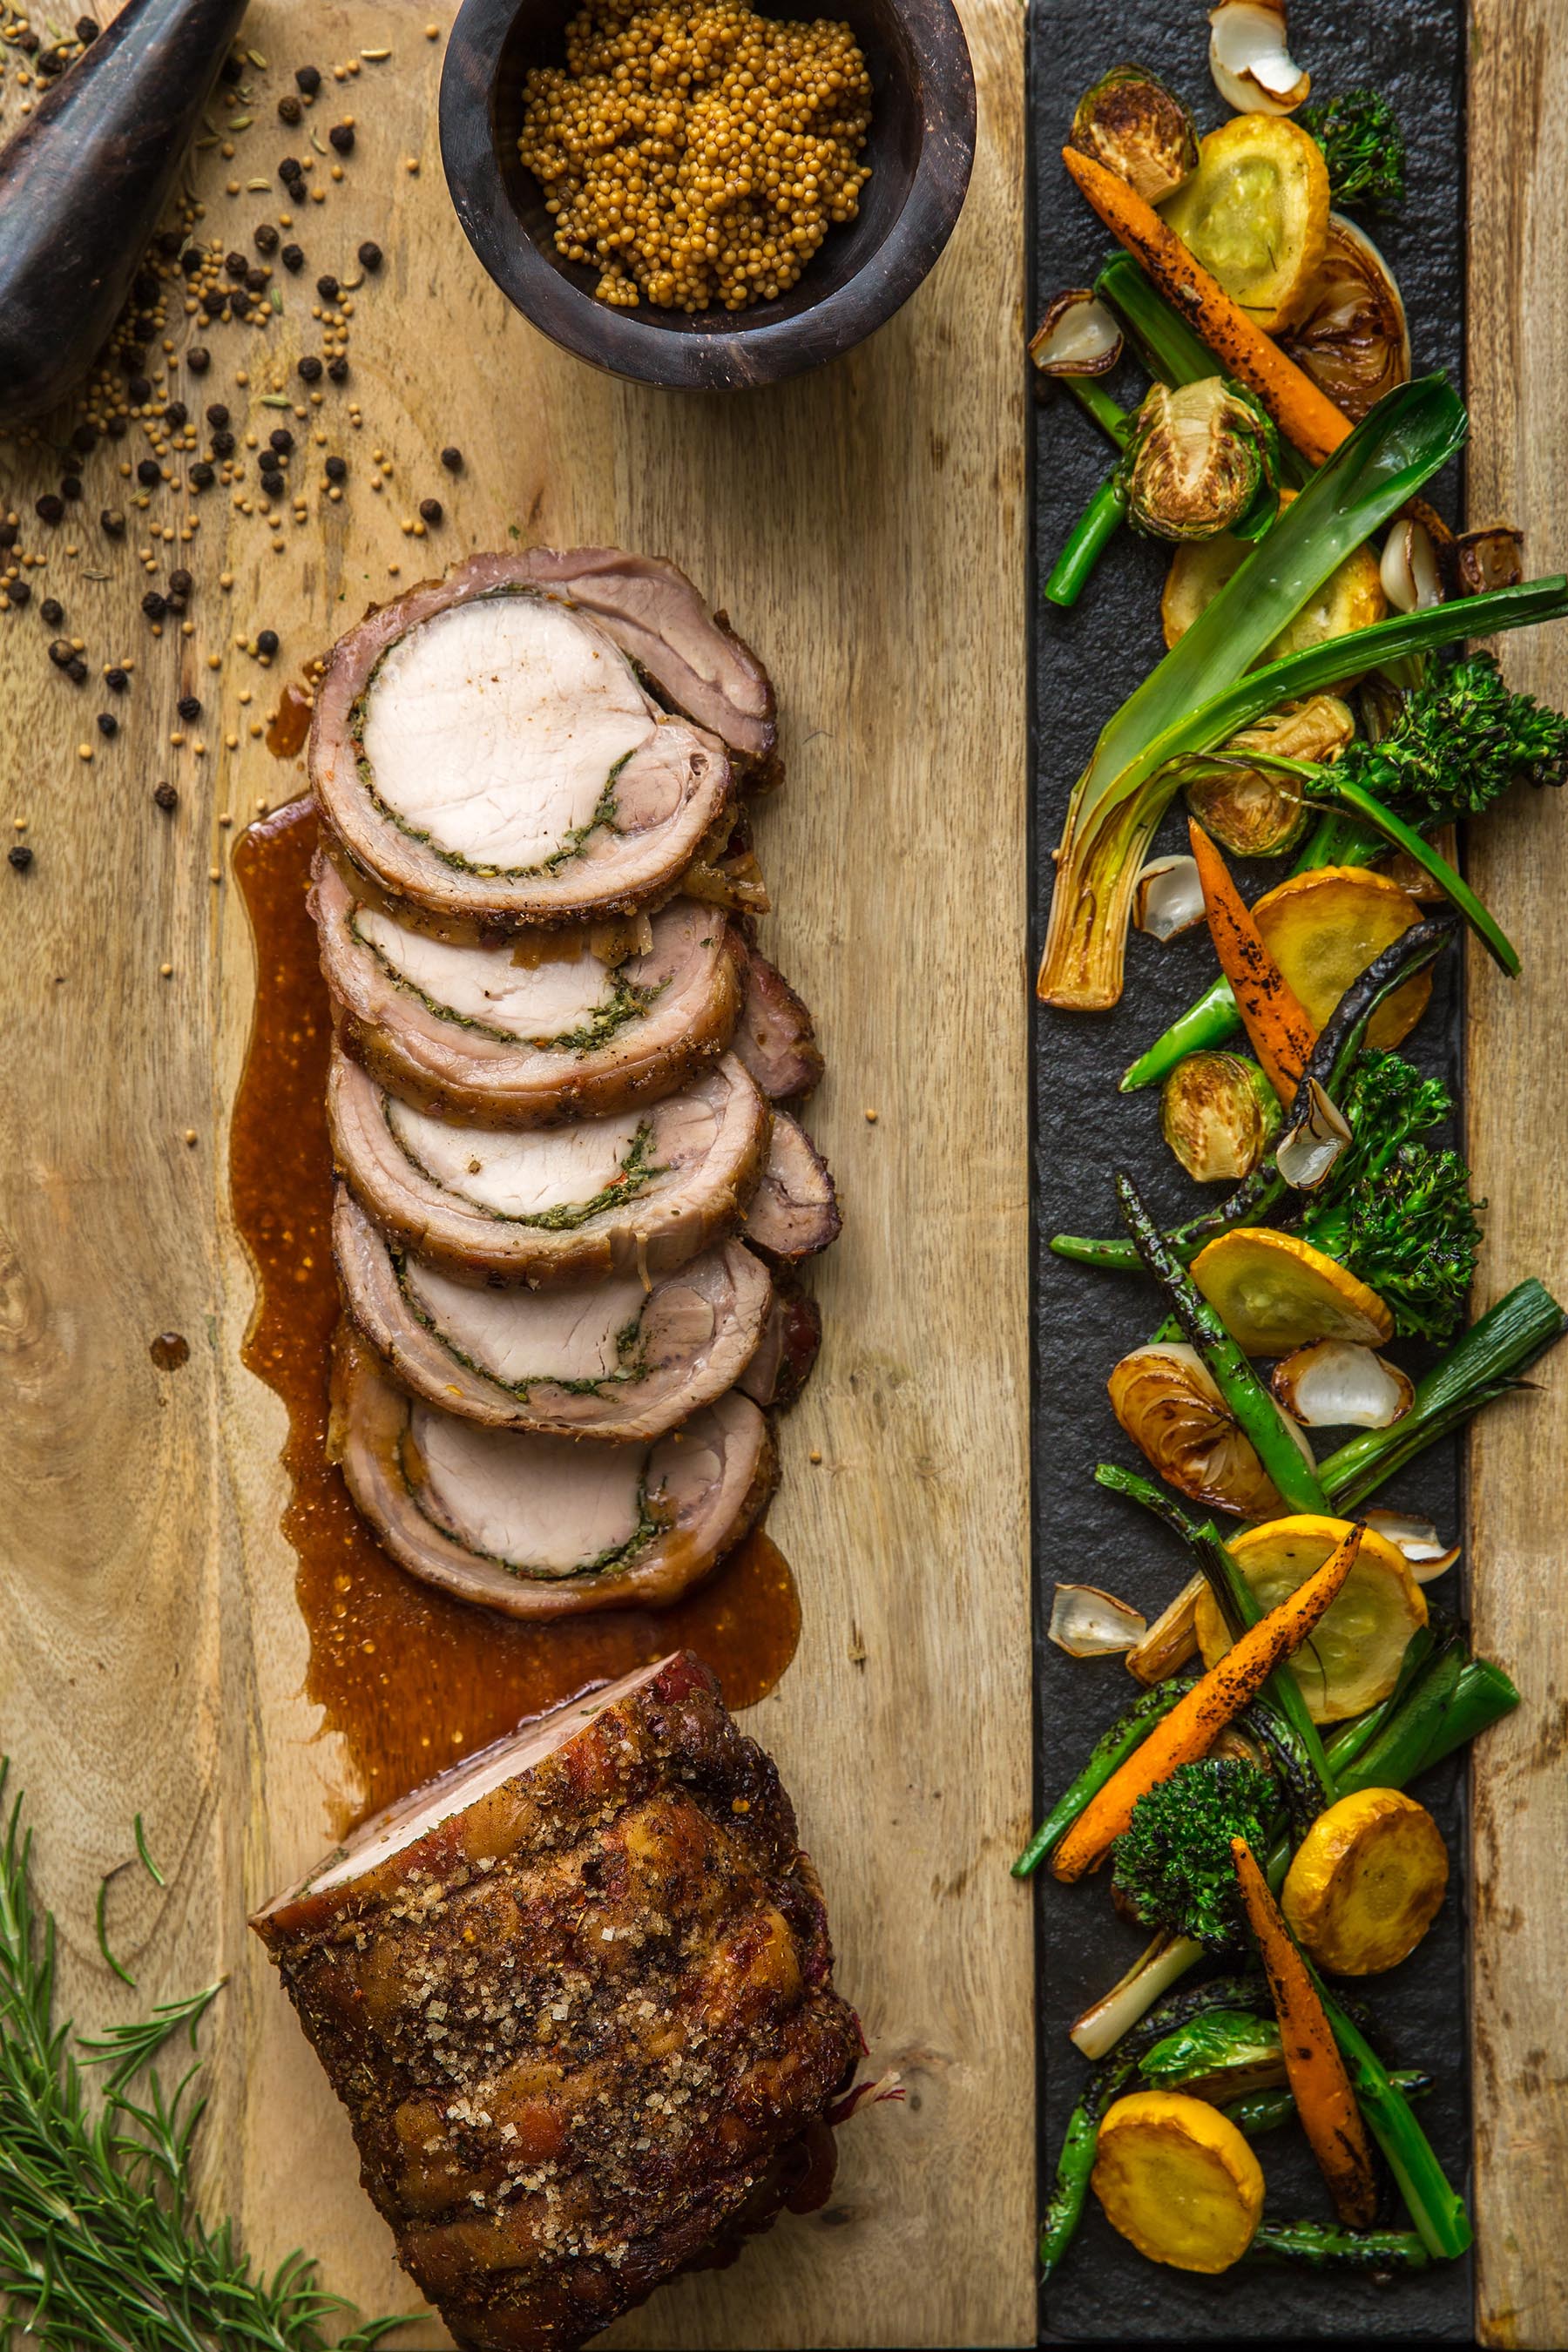 Prepared on Harvest’s contemporary rotisserie, the noteworthy 24-hour local-ale-brined Slow Roasted Porchetta is seasoned to perfection with rosemary and garlic